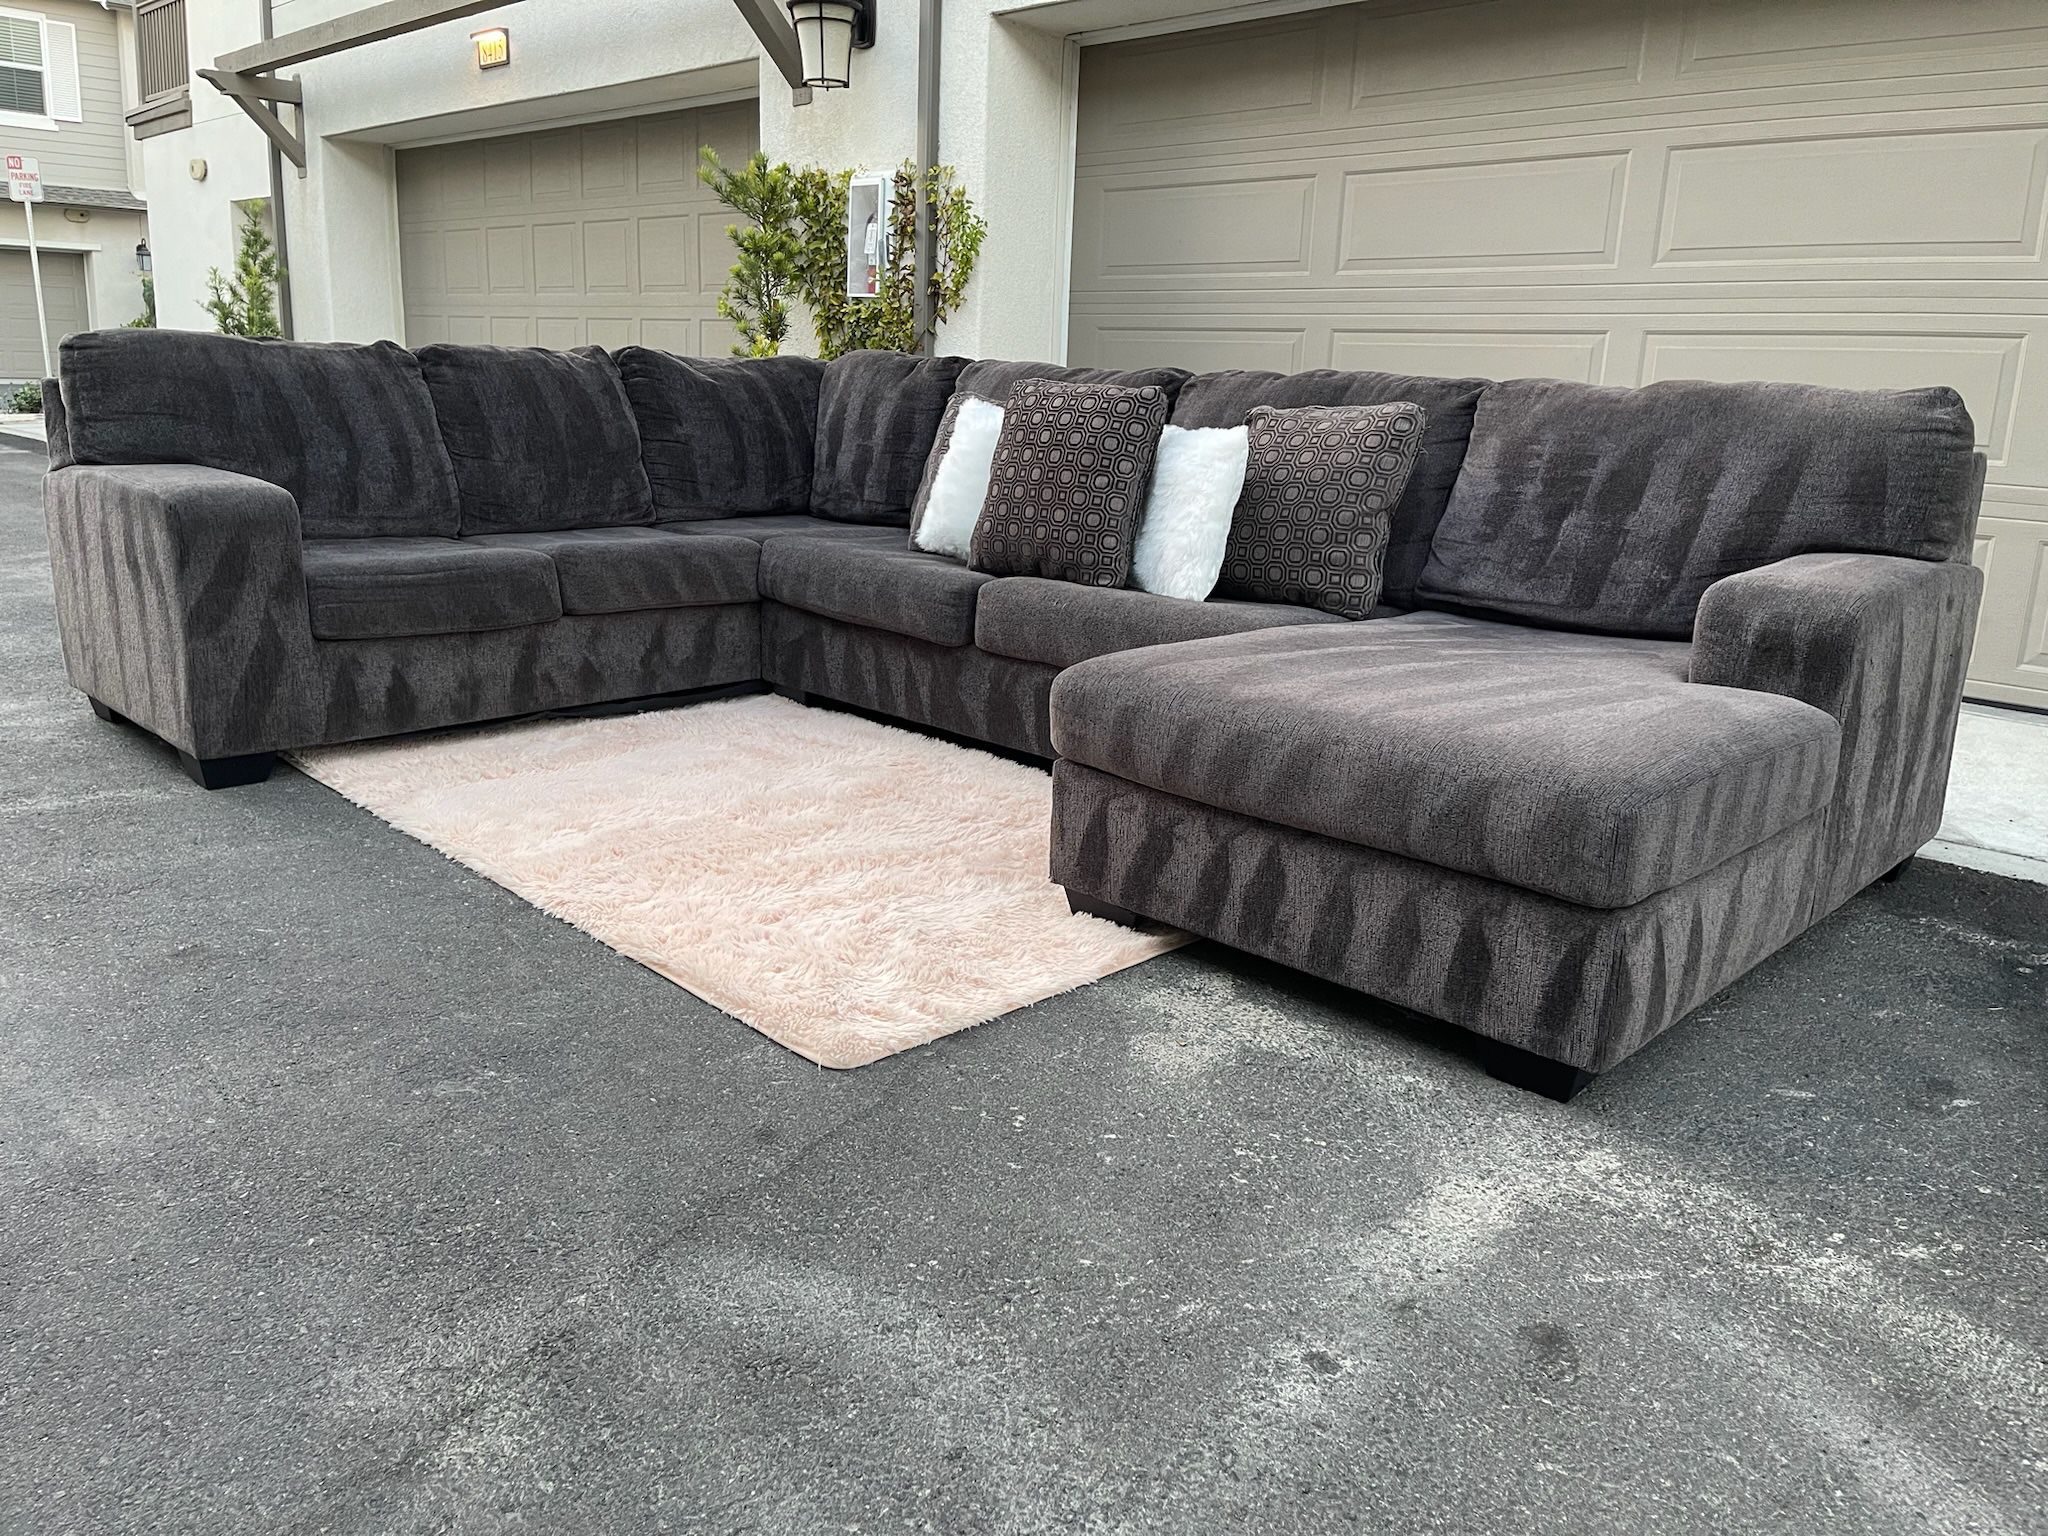 Huge Dark Grey Sectional Couch From Ashley Furniture In Excellent Condition - FREE DELIVERY 🚛